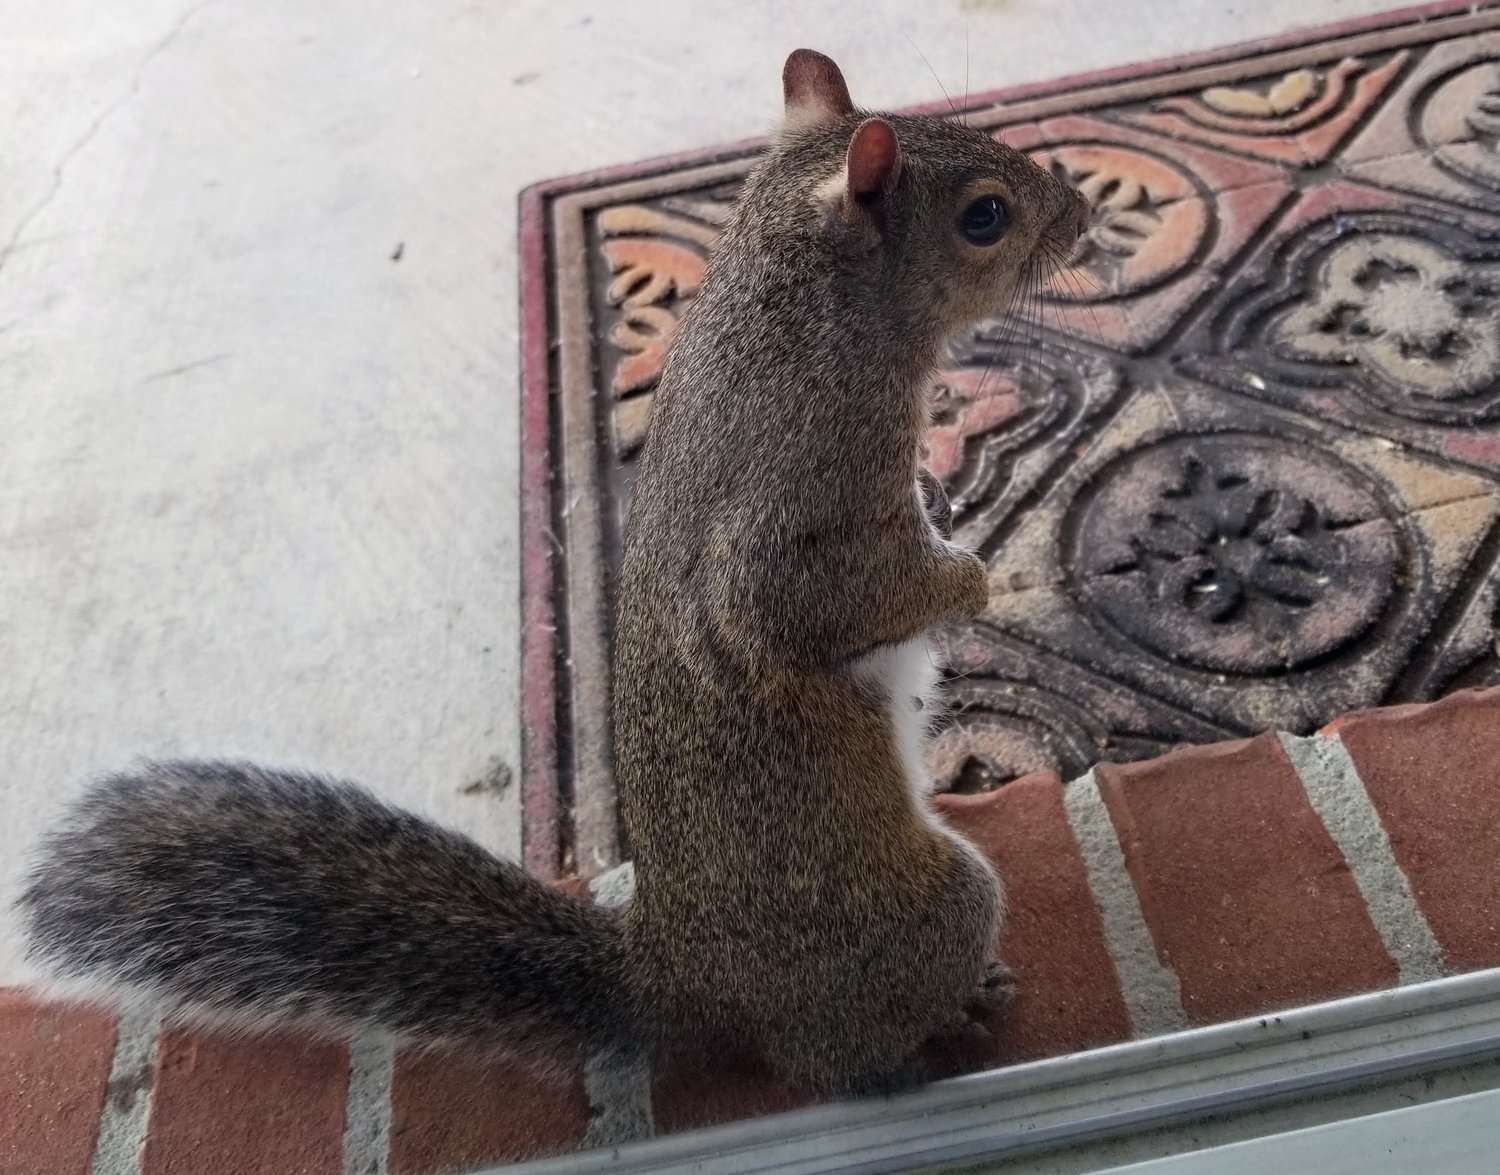 How To Get Rid Of Squirrels - Do-It-Yourself Pest Control